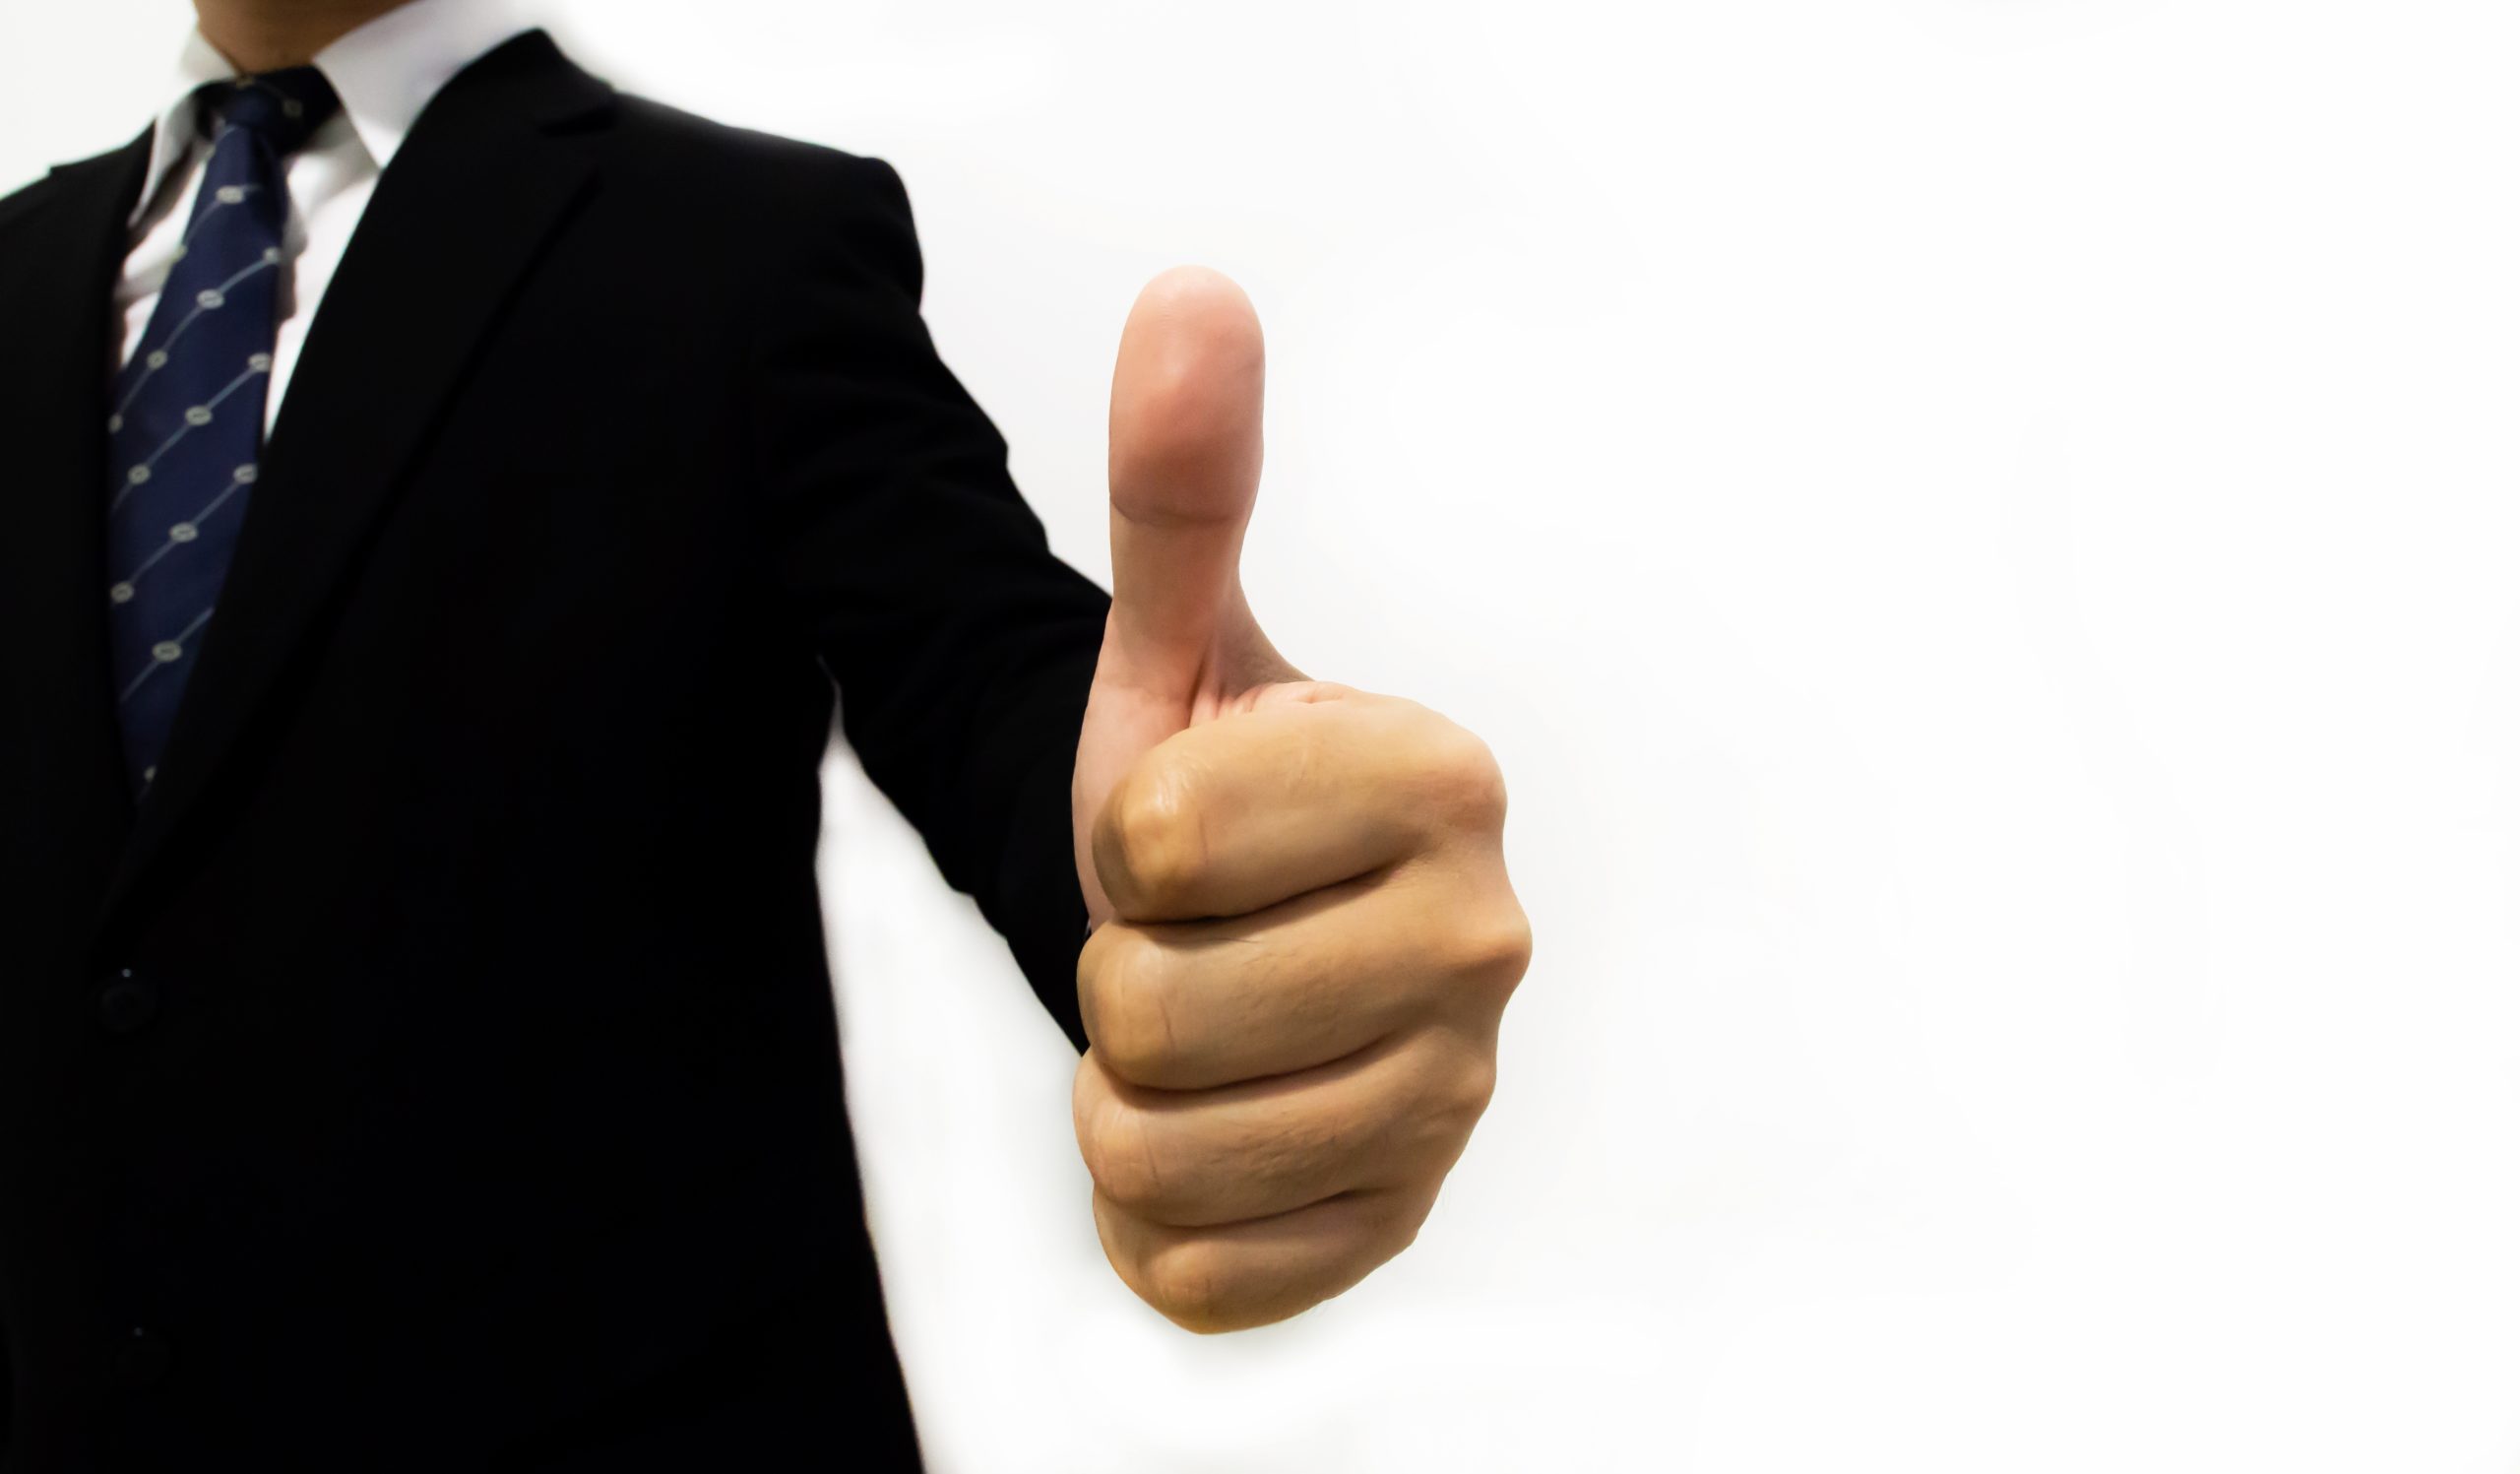 thumbs up gesture from a man in suit